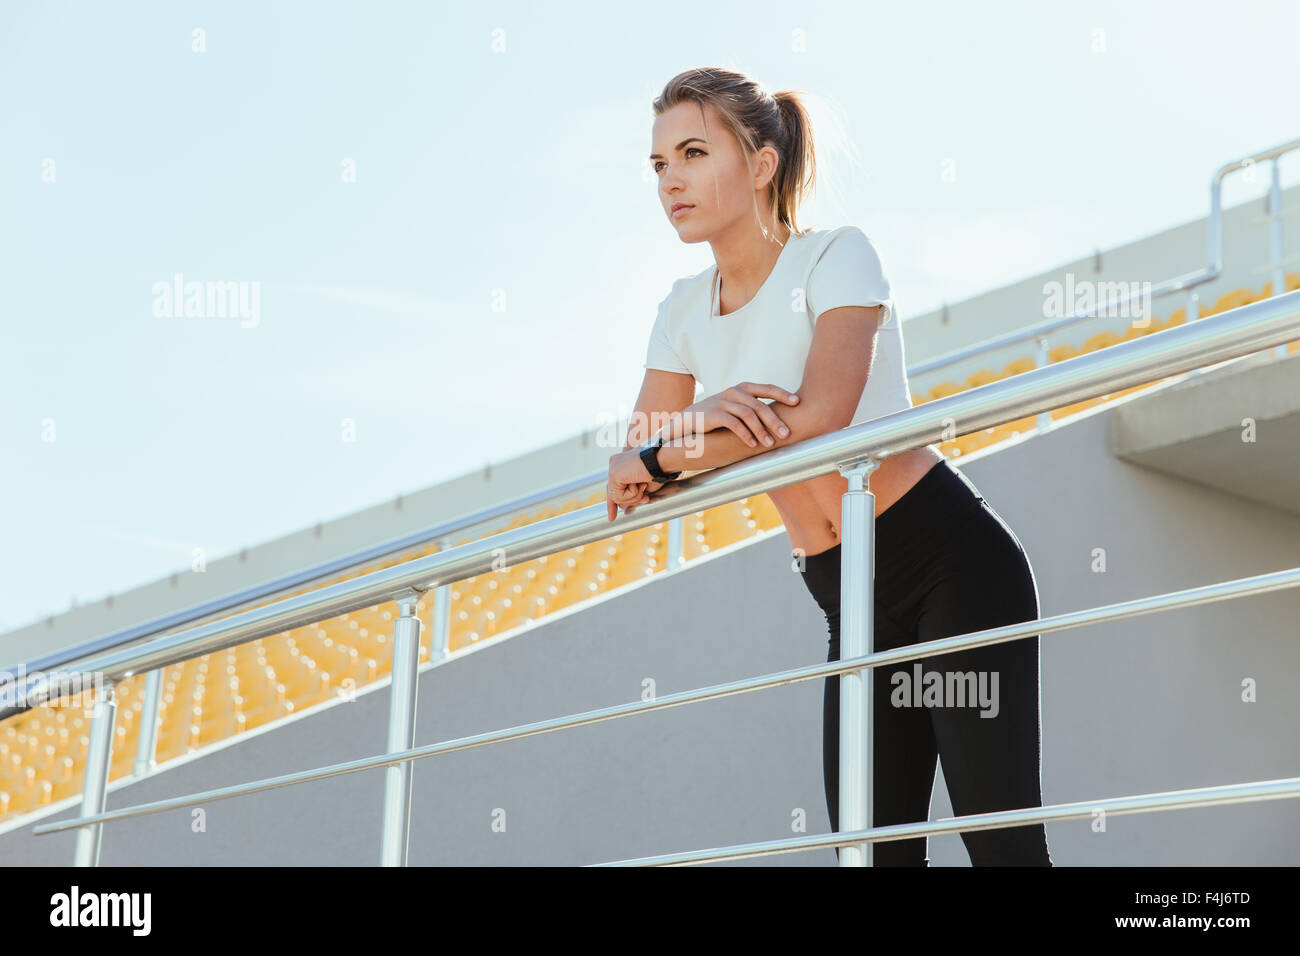 Portrait of a beautiful woman in sports wear standing on outdoor stadium Stock Photo